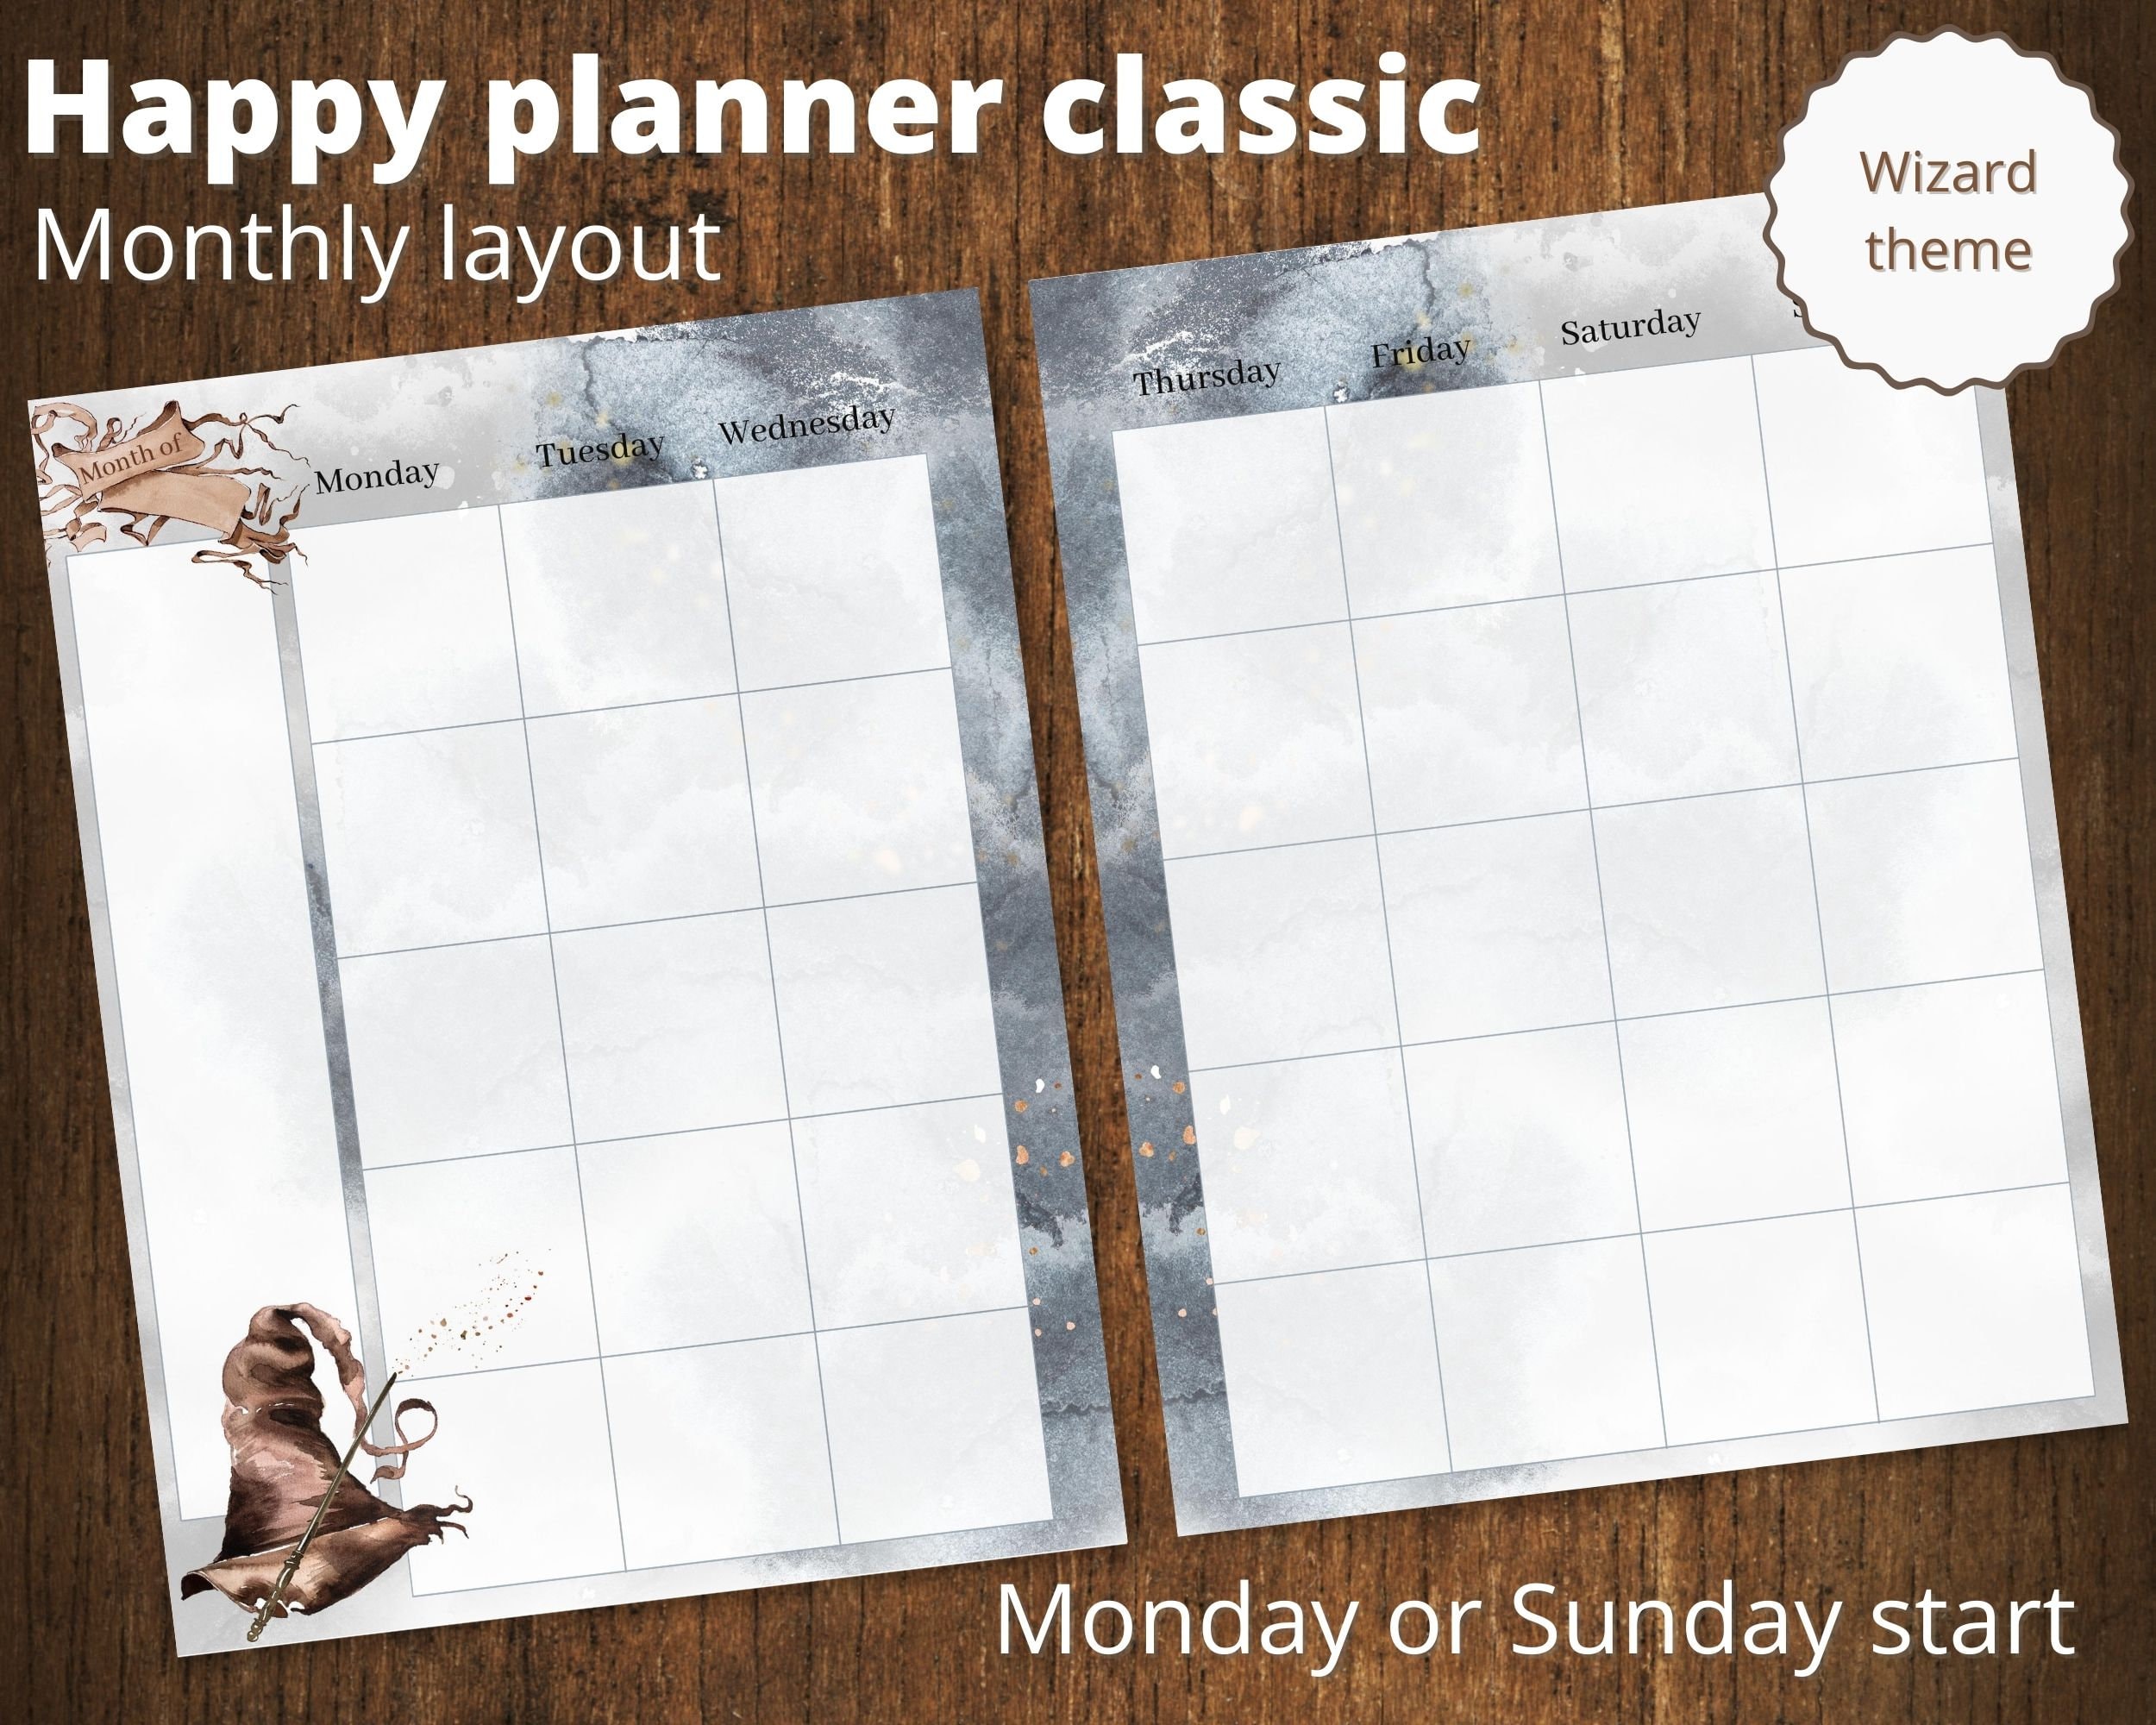 Lash and Mascara Planner Note Pages, A5/LV/GM Agenda Inserts, Classic Happy  Planner Insert, Big Happy Planner Insert, Beauty Insert, Makeup